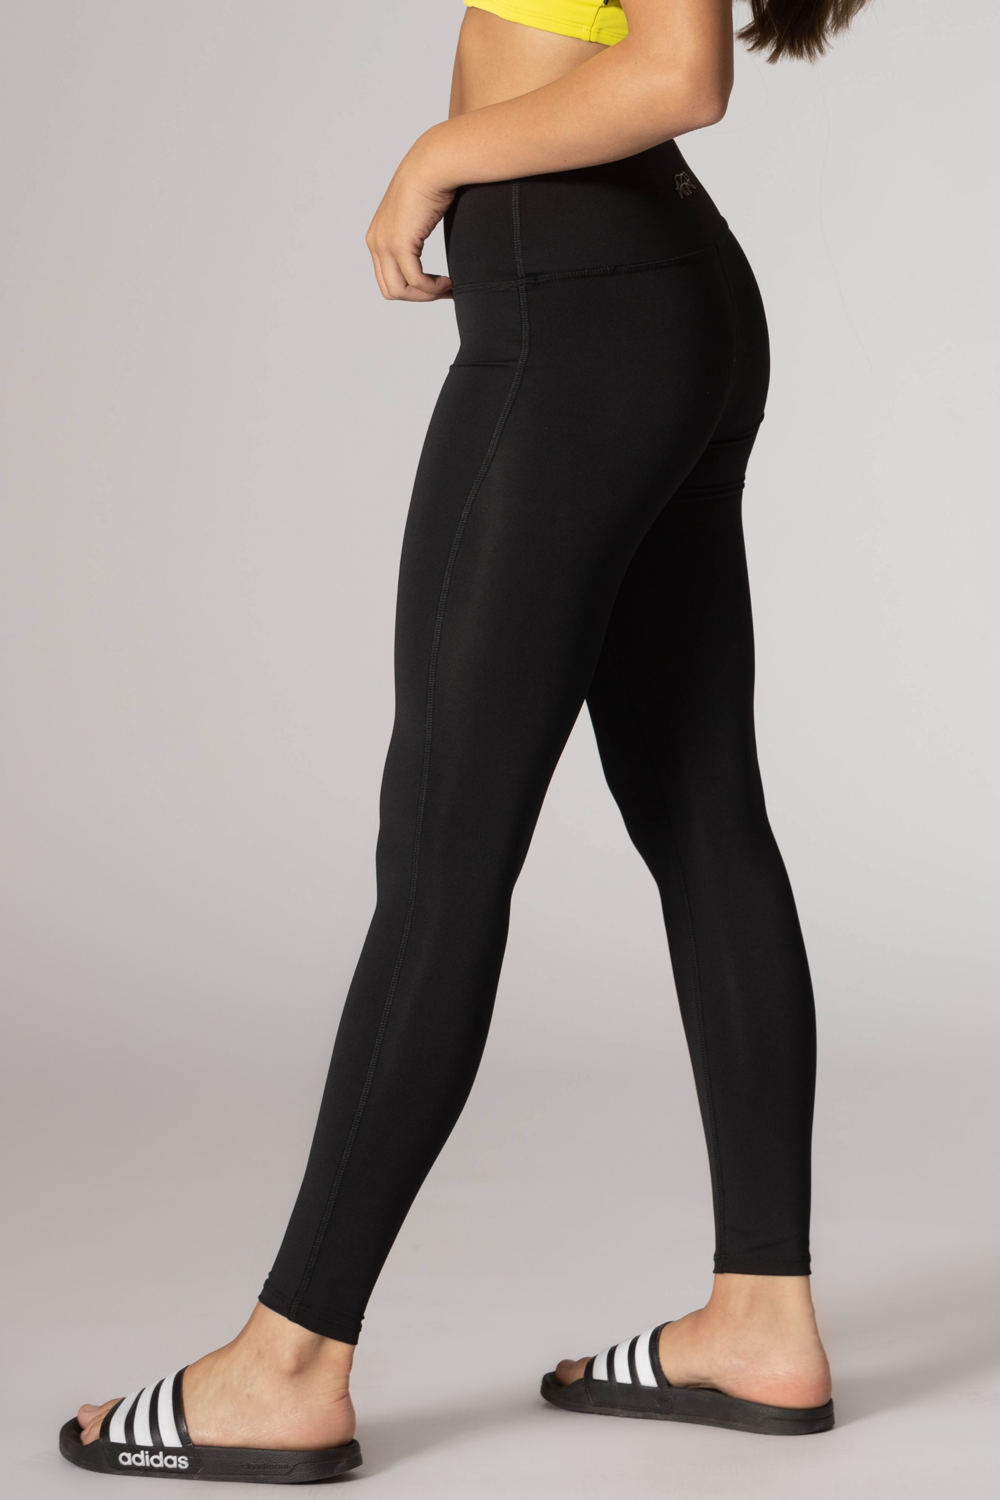 Buy Only Play Play Tiger Two Tone Leggings - Black